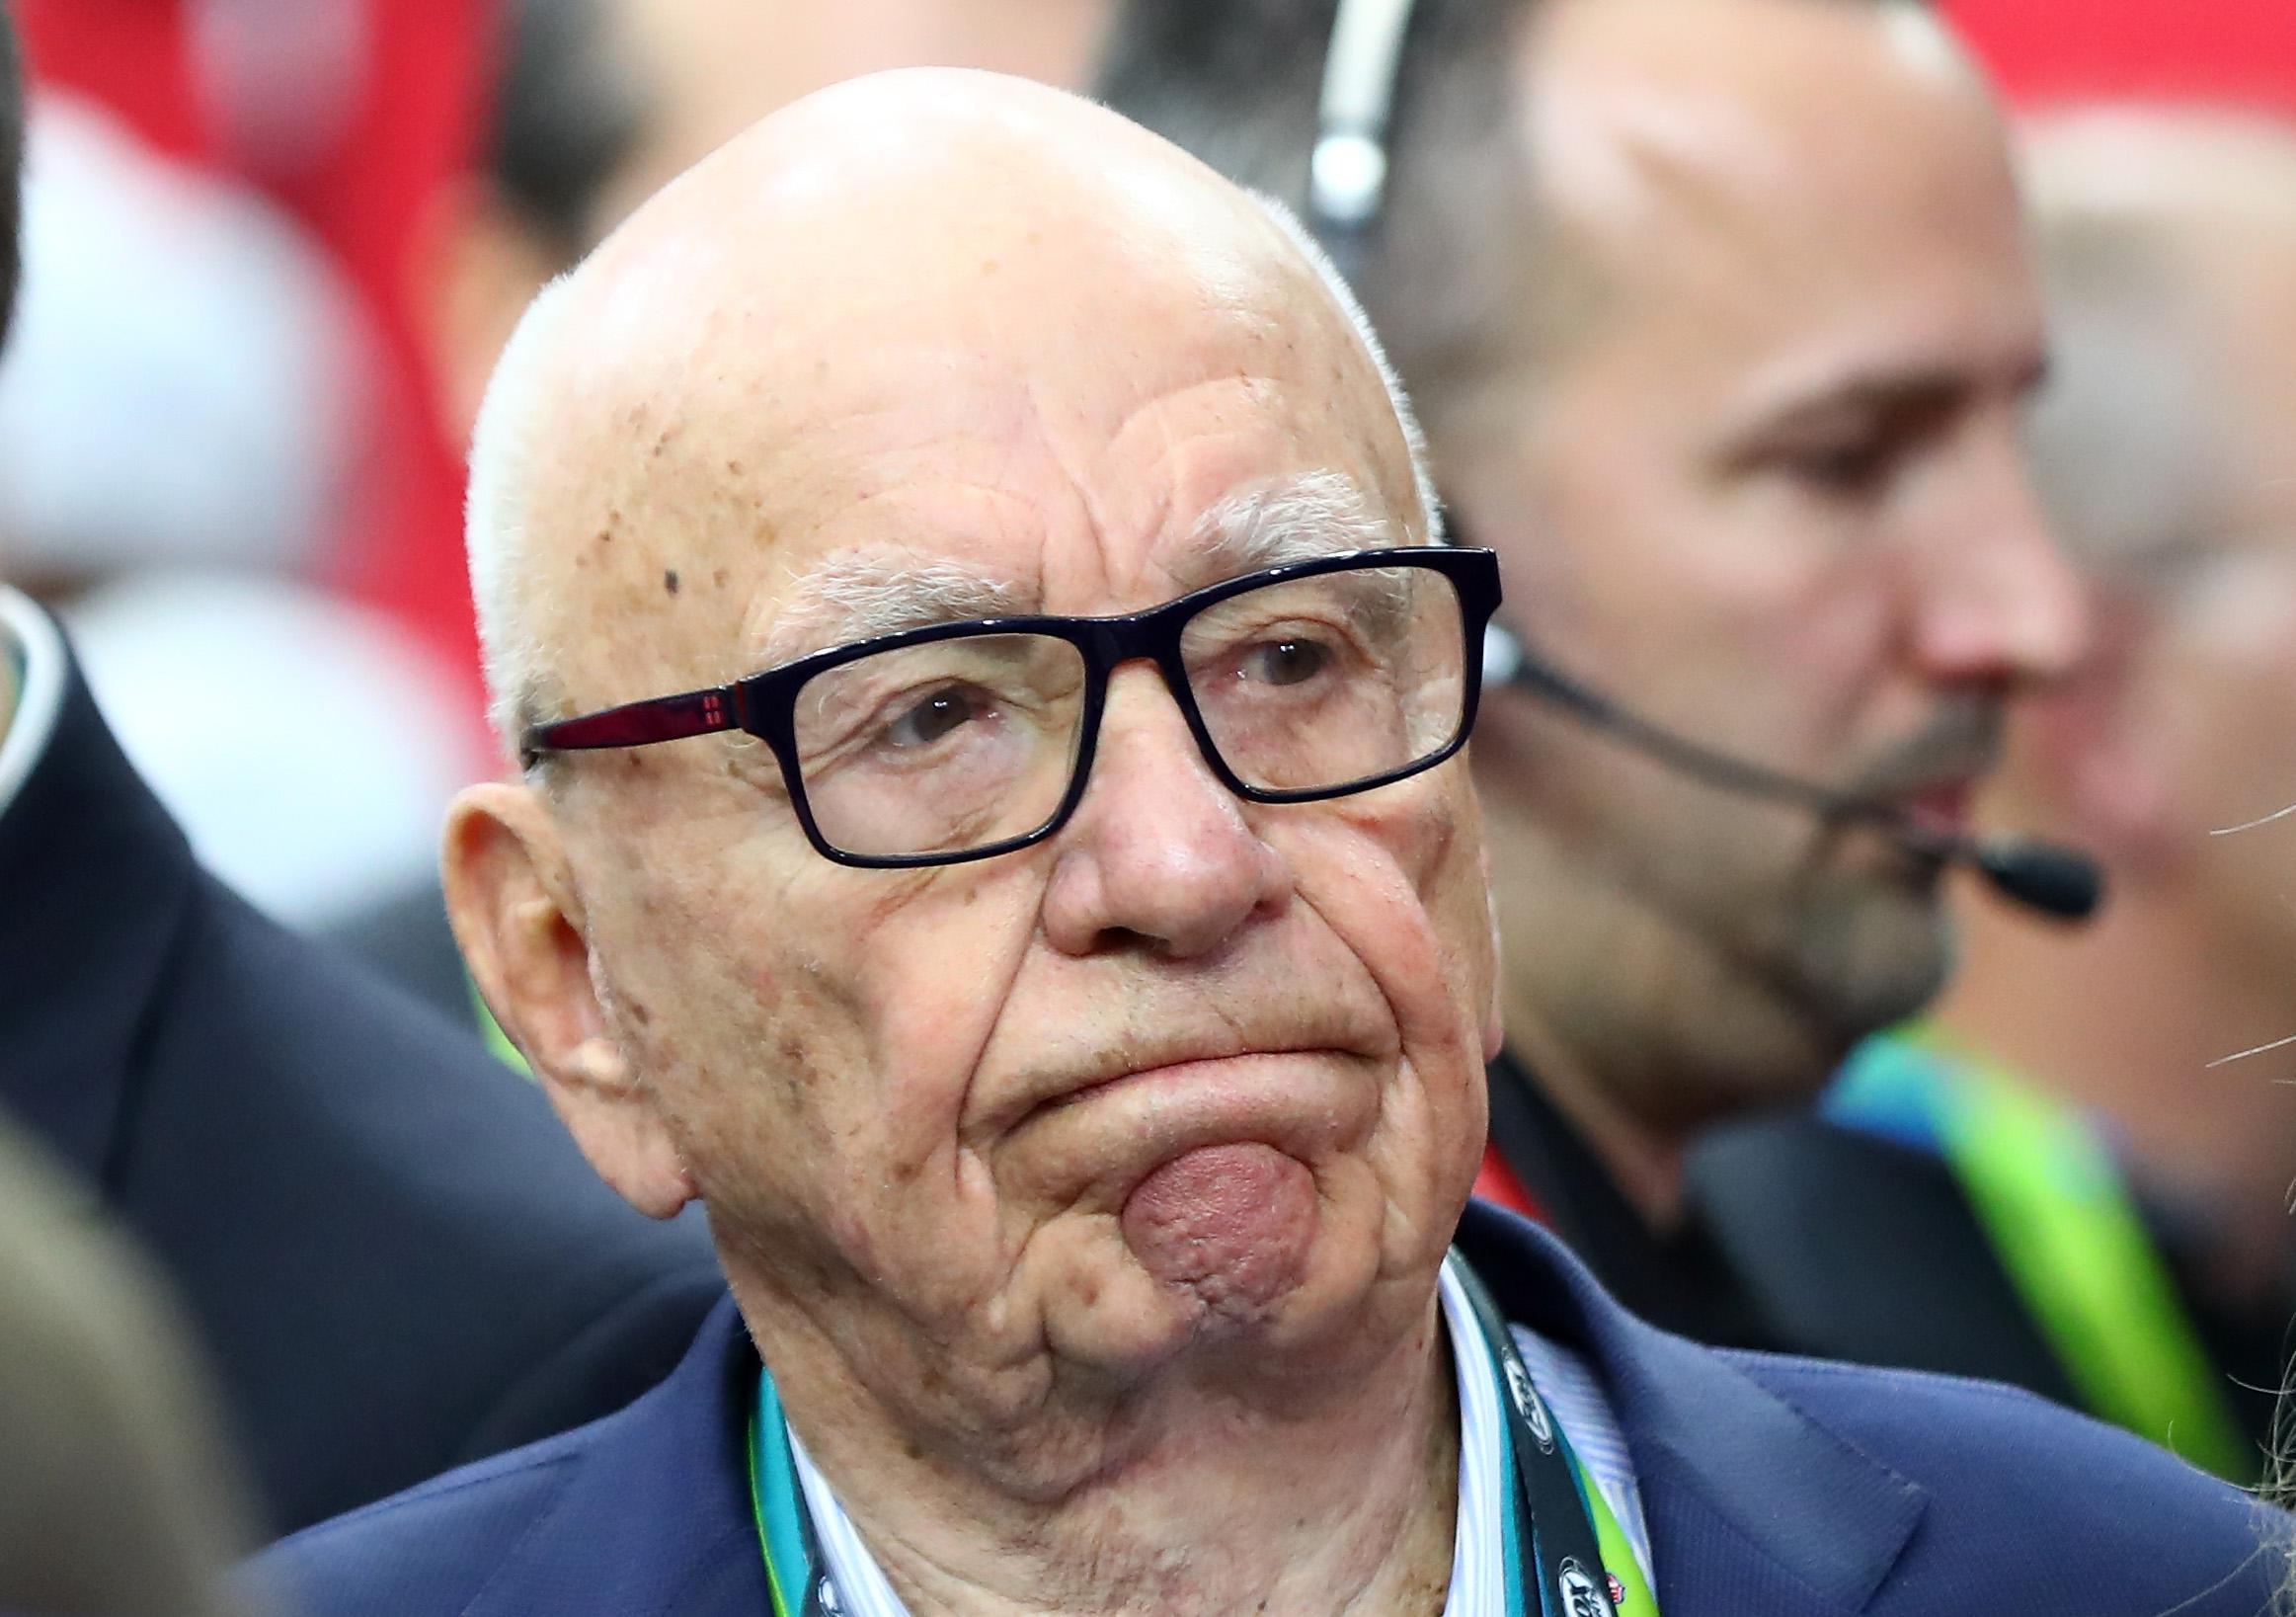 Rupert Murdoch's bid for Sky will be delayed for six months while the CMA investigates